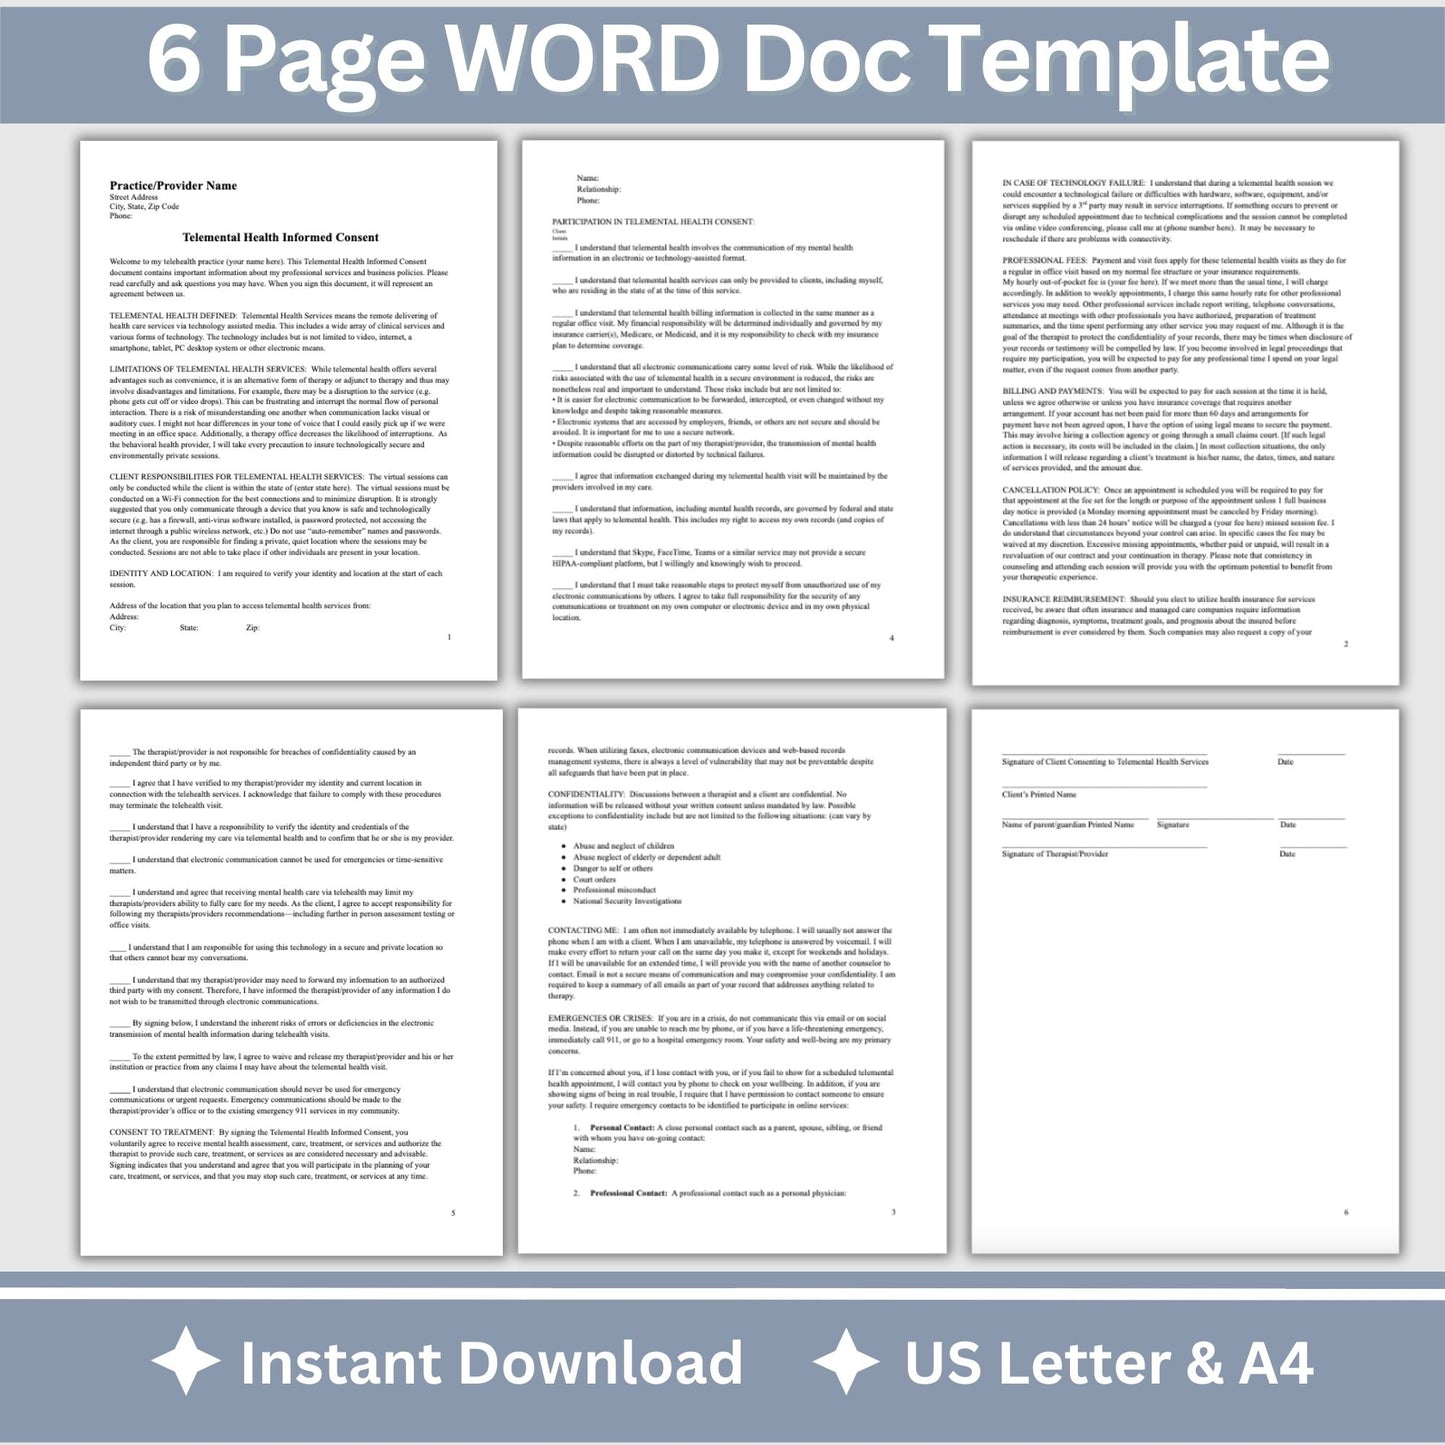 Telemental Health Informed Consent Template, professionally designed for private practice therapist offices.  This consent template provides a clear, and comprehensive guide to the services you offer remotely. Mental Health Consent, counseling forms